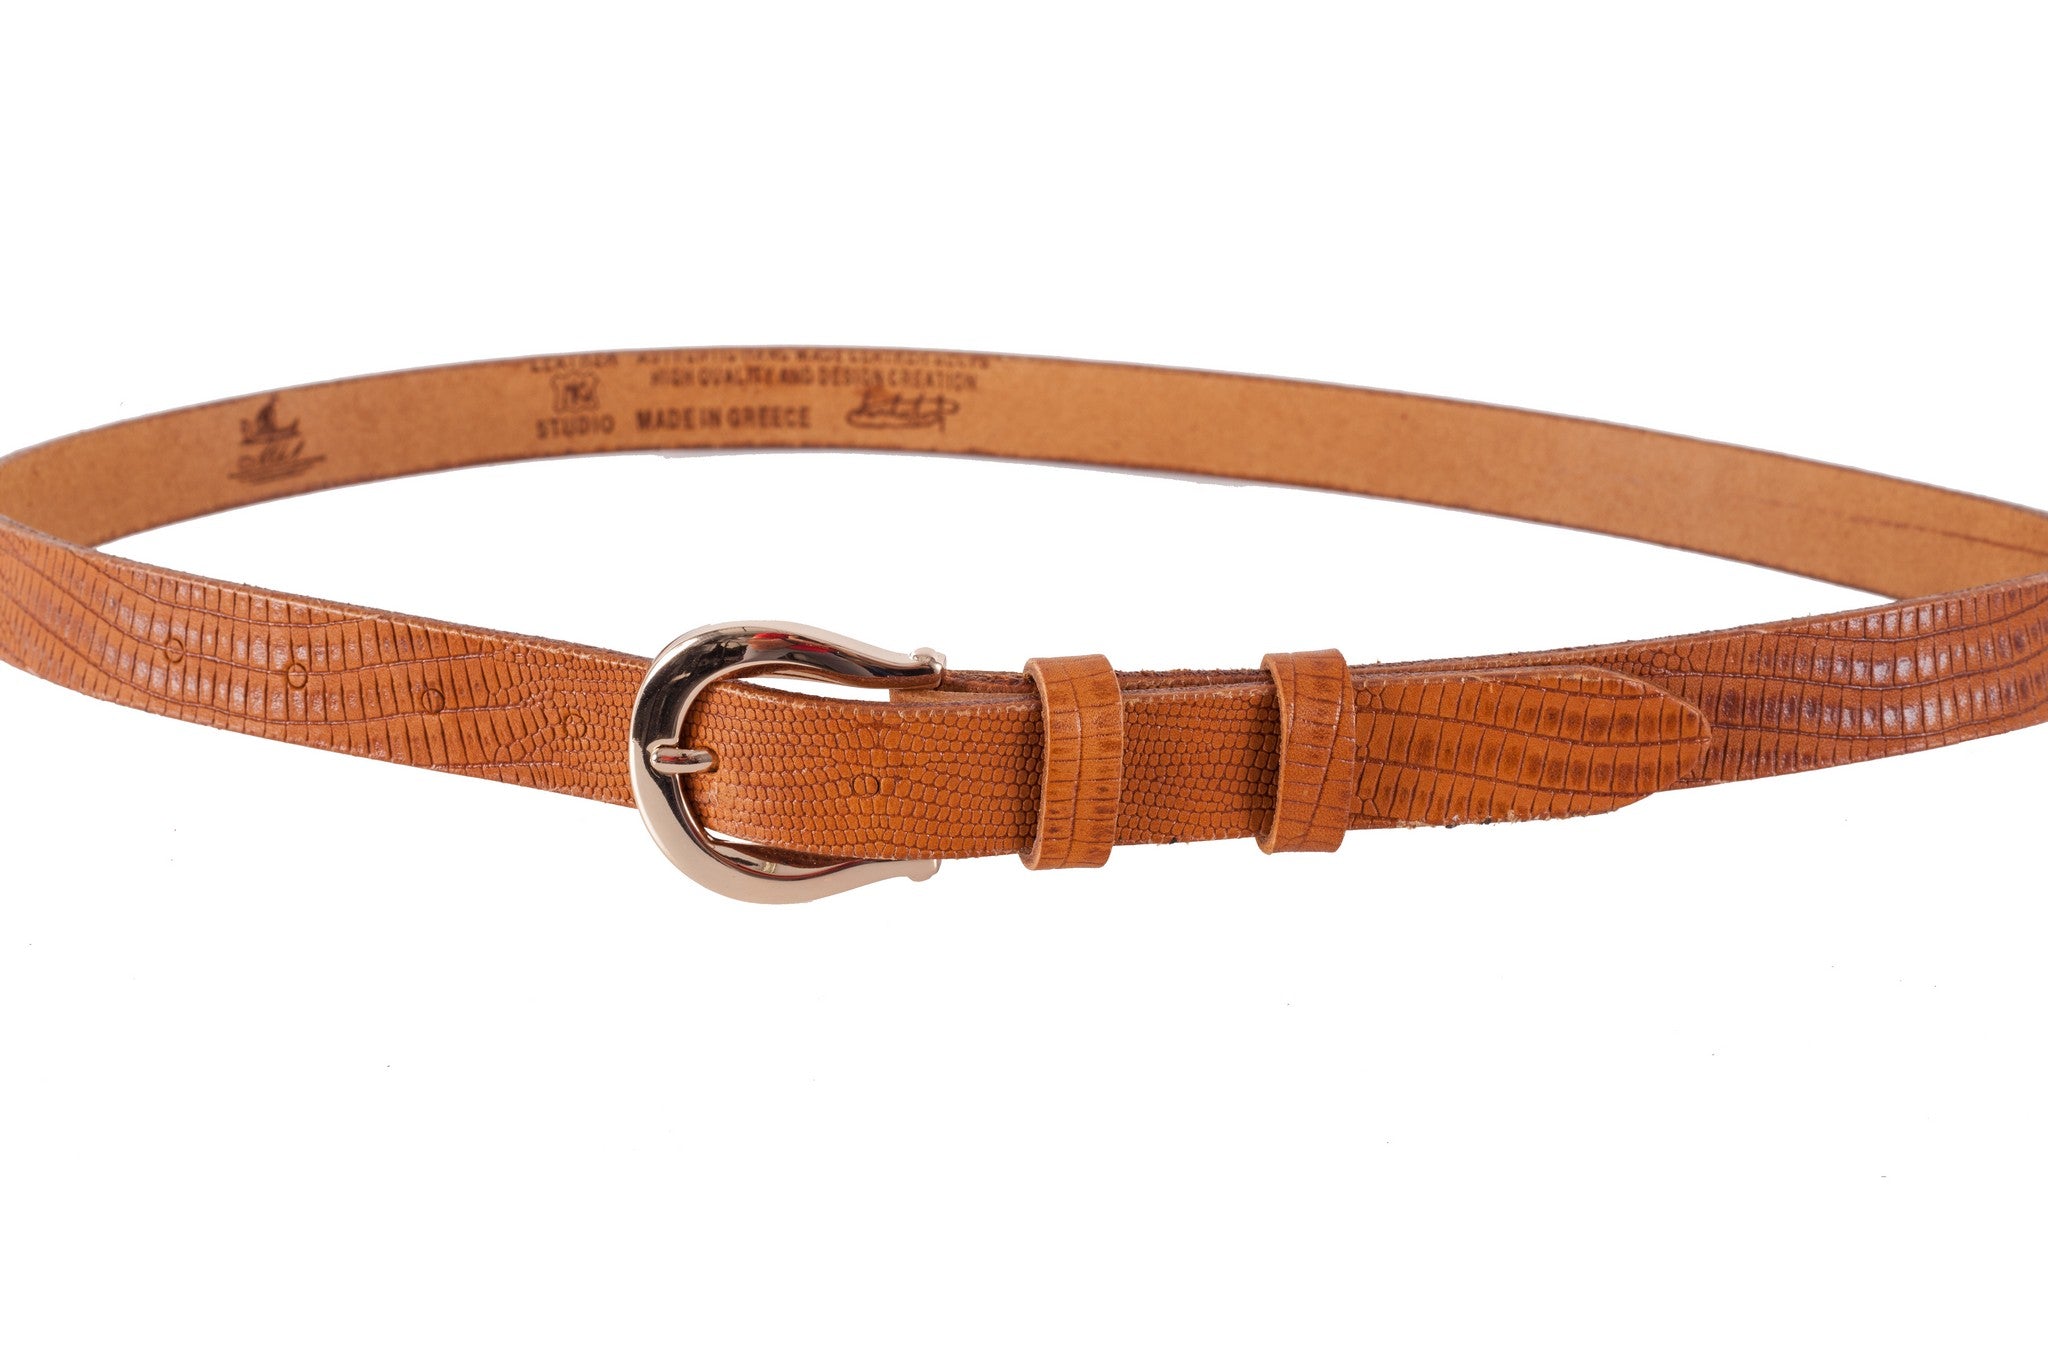 WW418/25 Belt in camel color with relief design with an beautiful 2.5cm width buckle